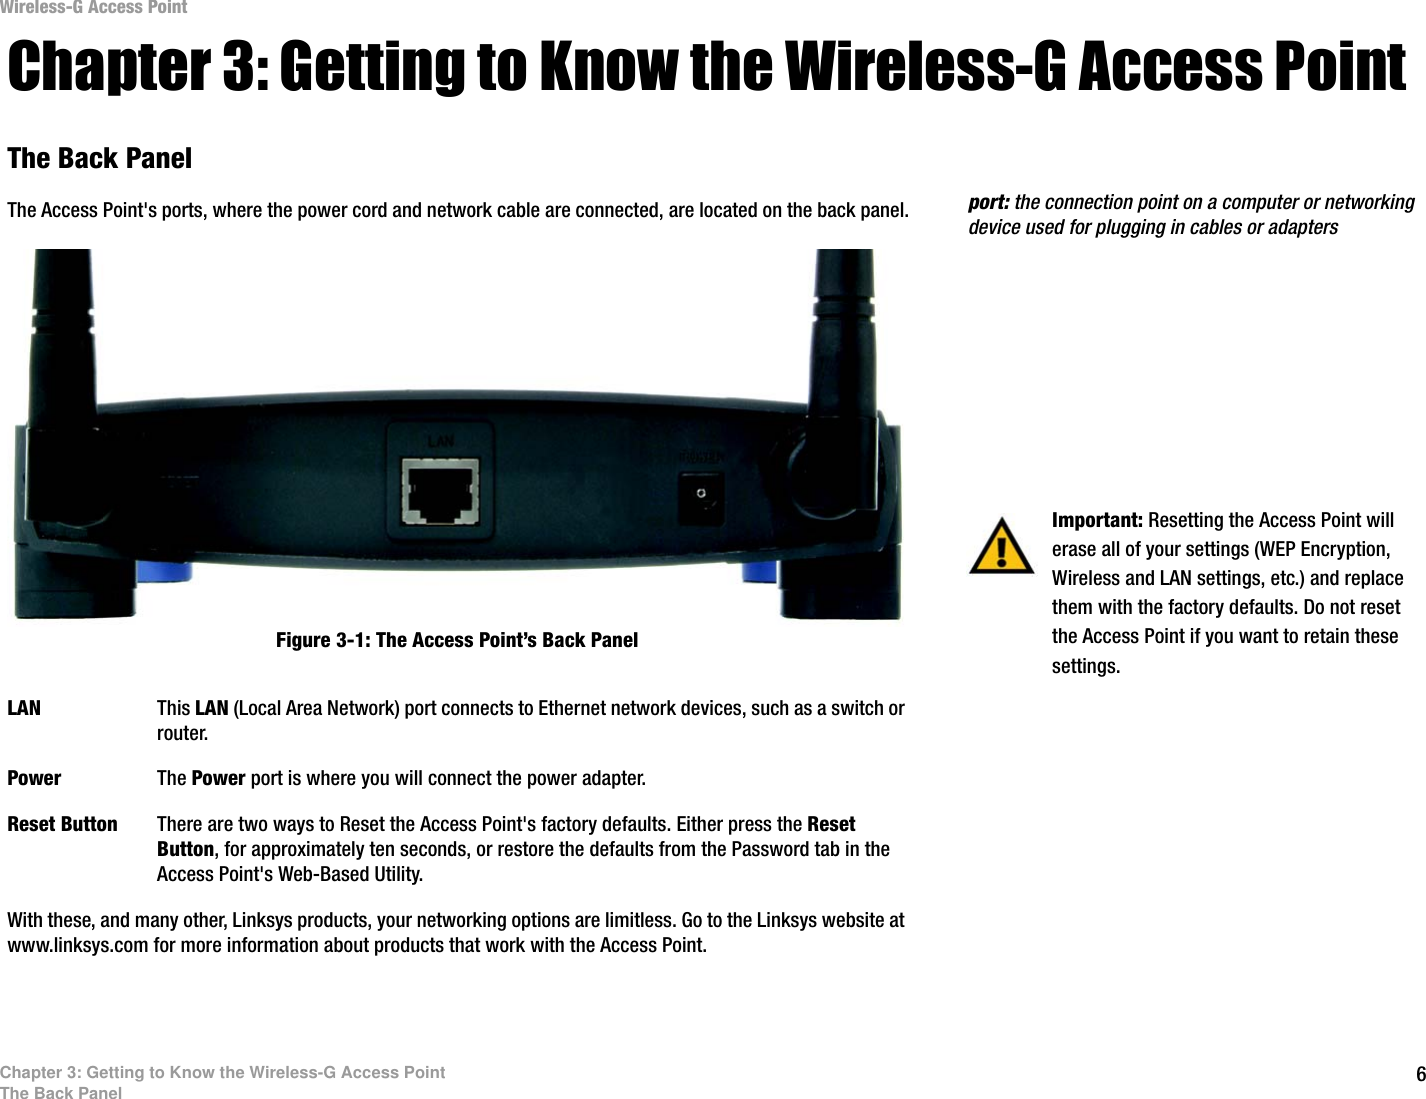 6Chapter 3: Getting to Know the Wireless-G Access PointThe Back PanelWireless-G Access PointChapter 3: Getting to Know the Wireless-G Access PointThe Back PanelThe Access Point&apos;s ports, where the power cord and network cable are connected, are located on the back panel.LAN This LAN (Local Area Network) port connects to Ethernet network devices, such as a switch or router.Power The Power port is where you will connect the power adapter.Reset Button There are two ways to Reset the Access Point&apos;s factory defaults. Either press the Reset Button, for approximately ten seconds, or restore the defaults from the Password tab in the Access Point&apos;s Web-Based Utility.With these, and many other, Linksys products, your networking options are limitless. Go to the Linksys website at www.linksys.com for more information about products that work with the Access Point.  Important: Resetting the Access Point will erase all of your settings (WEP Encryption, Wireless and LAN settings, etc.) and replace them with the factory defaults. Do not reset the Access Point if you want to retain these settings.Figure 3-1: The Access Point’s Back Panelport: the connection point on a computer or networking device used for plugging in cables or adapters